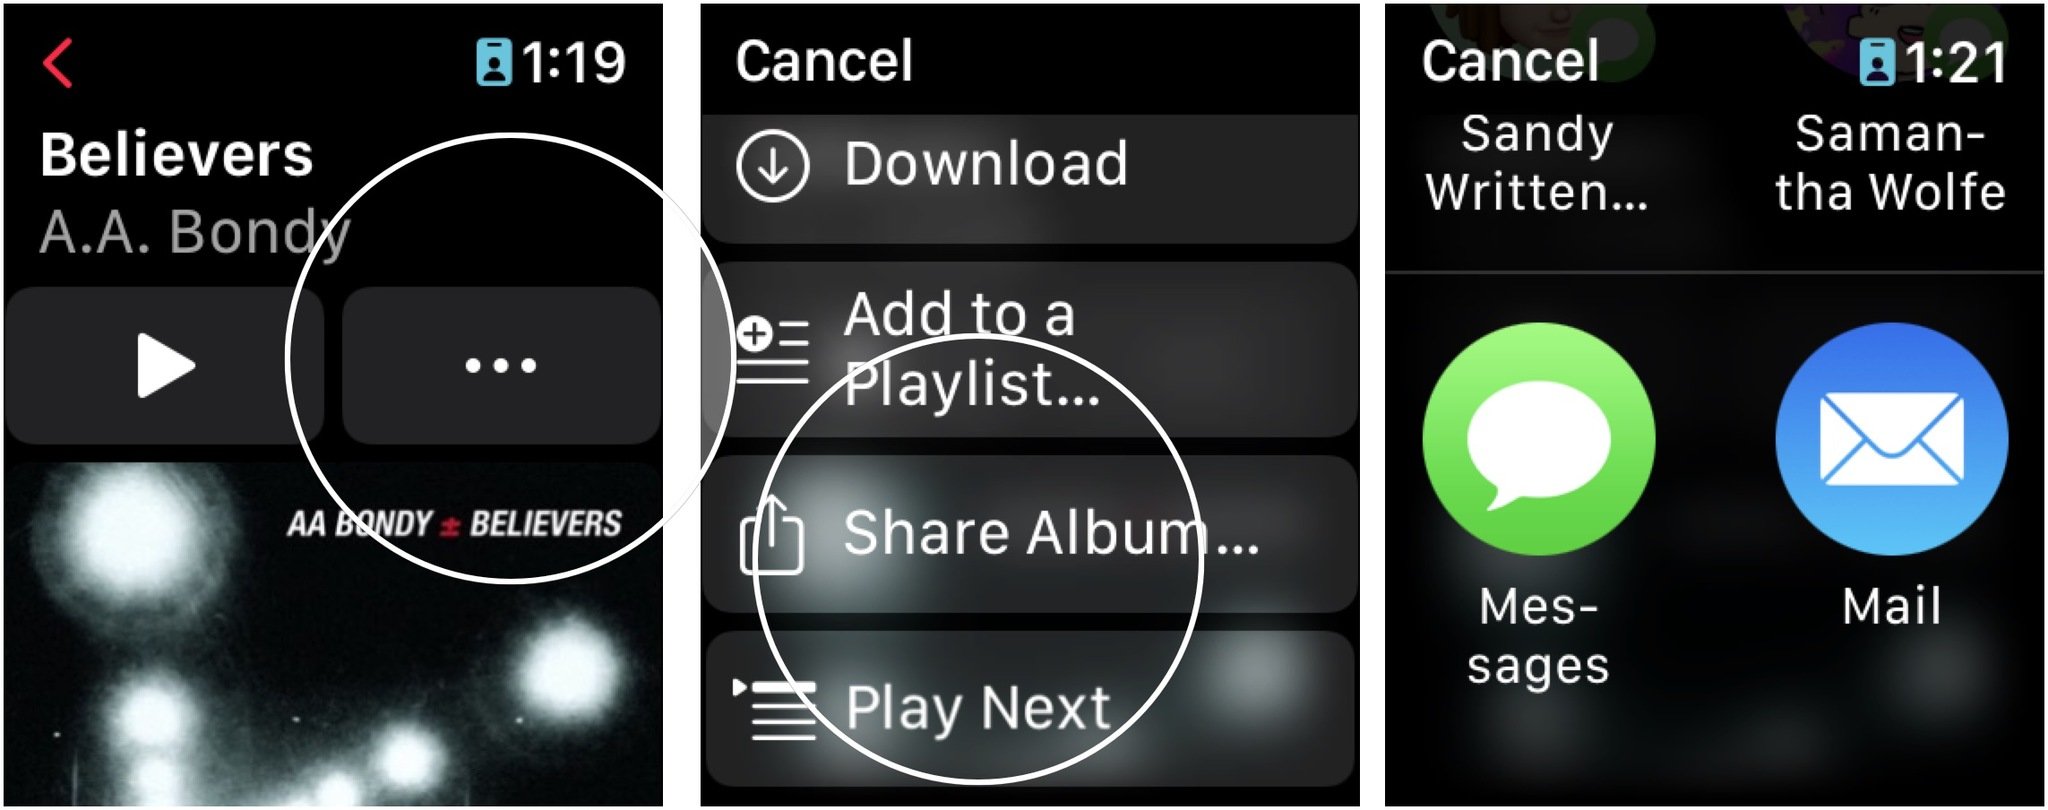 Share content via Messages and Email, tap a category and select the content you wish to share, then choose the ... box next to the Play button. Tap Share album, then choose Messages or Email to share the song. 